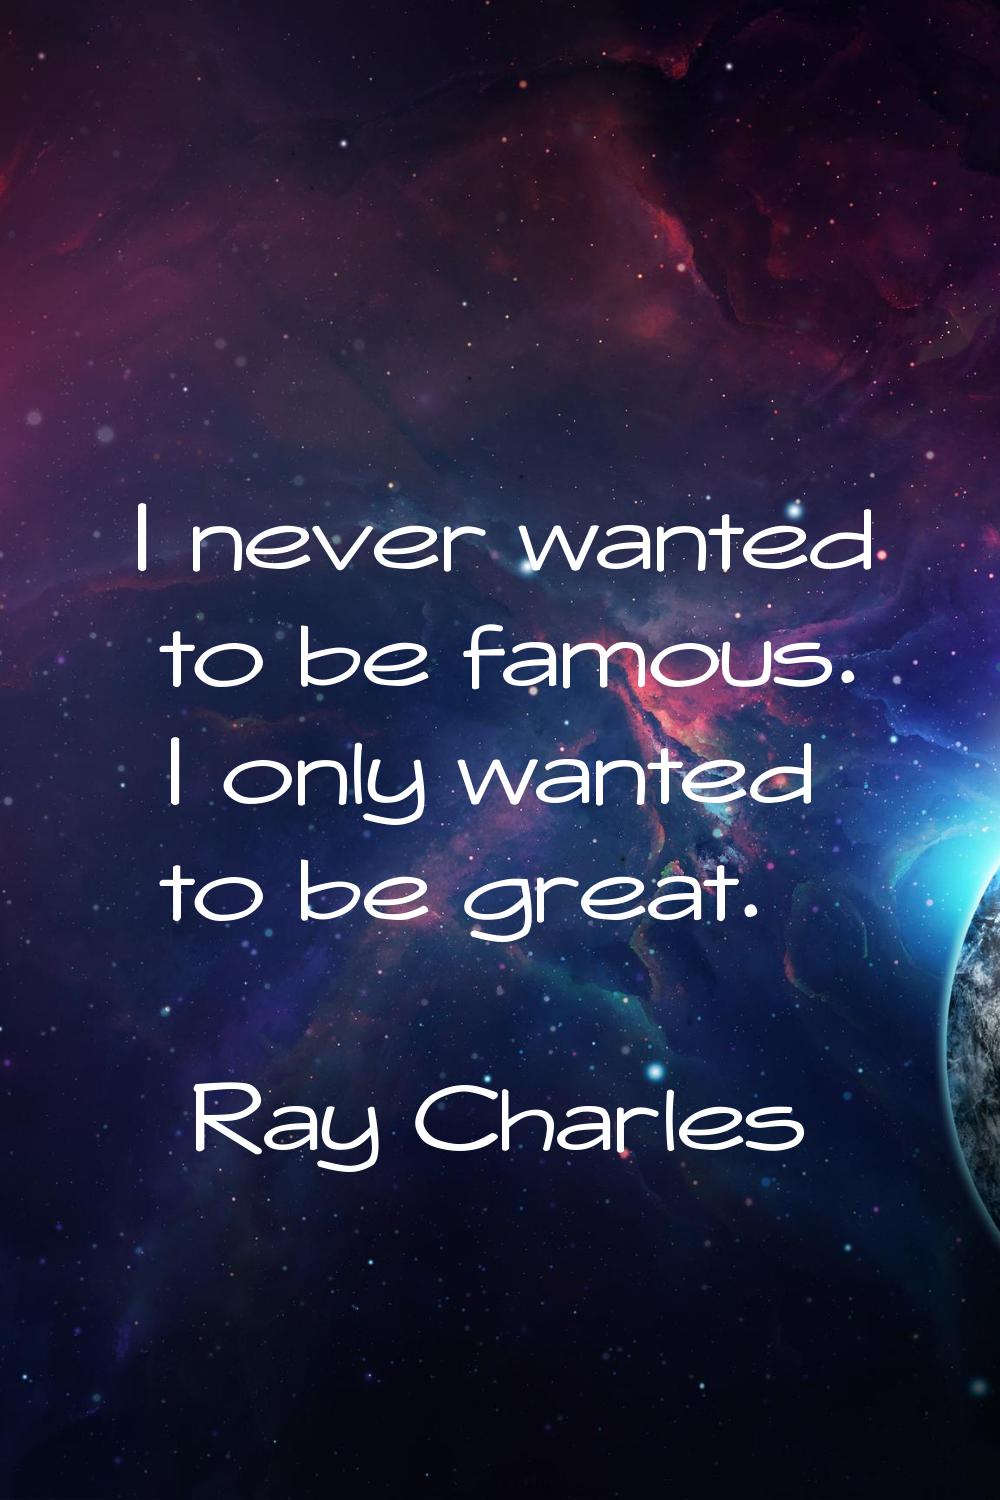 I never wanted to be famous. I only wanted to be great.